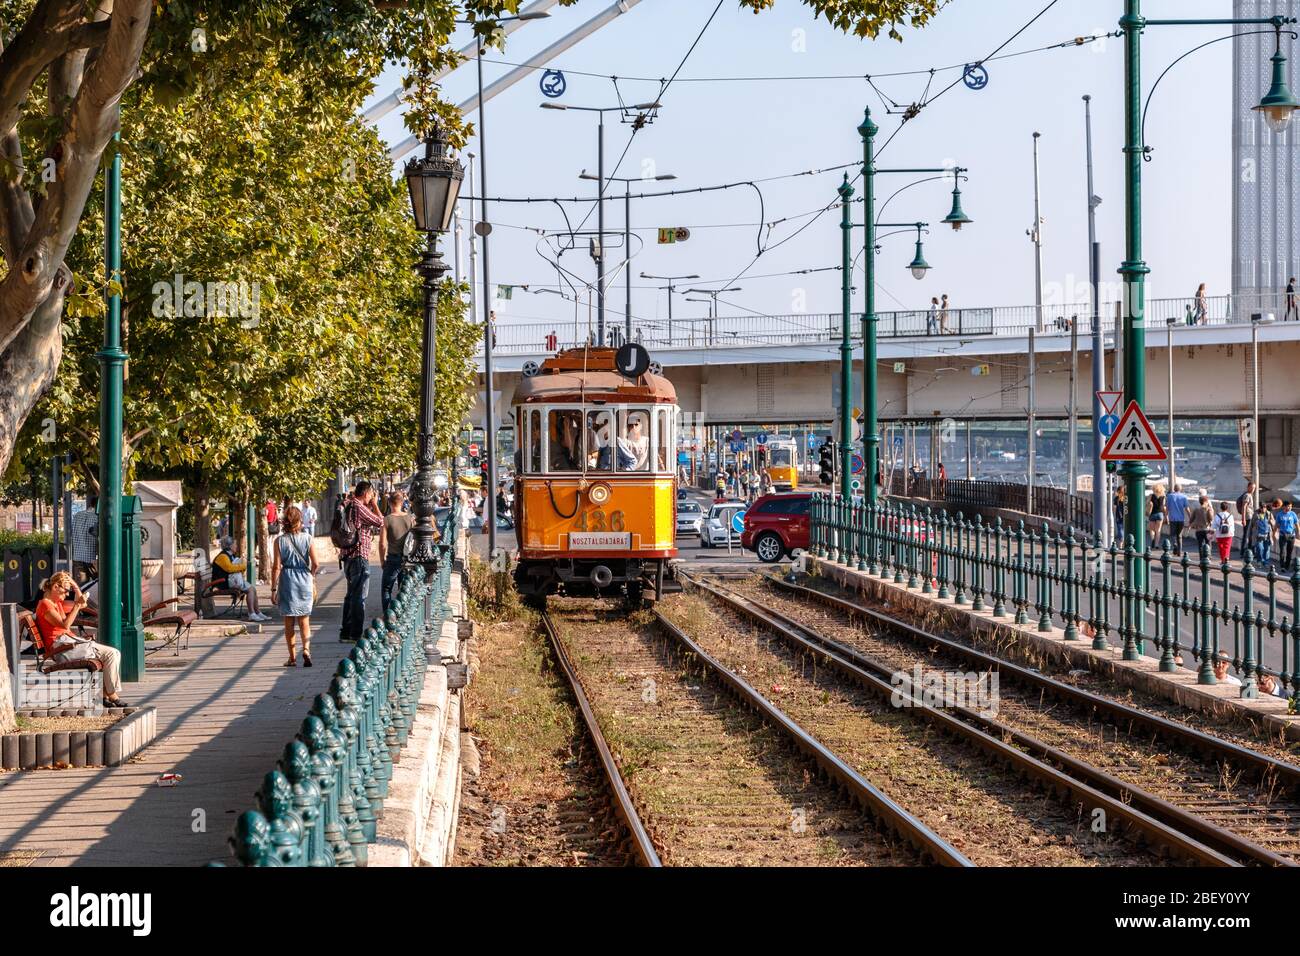 A nostalgia tram on line 2 in Budapest, Hungary Stock Photo